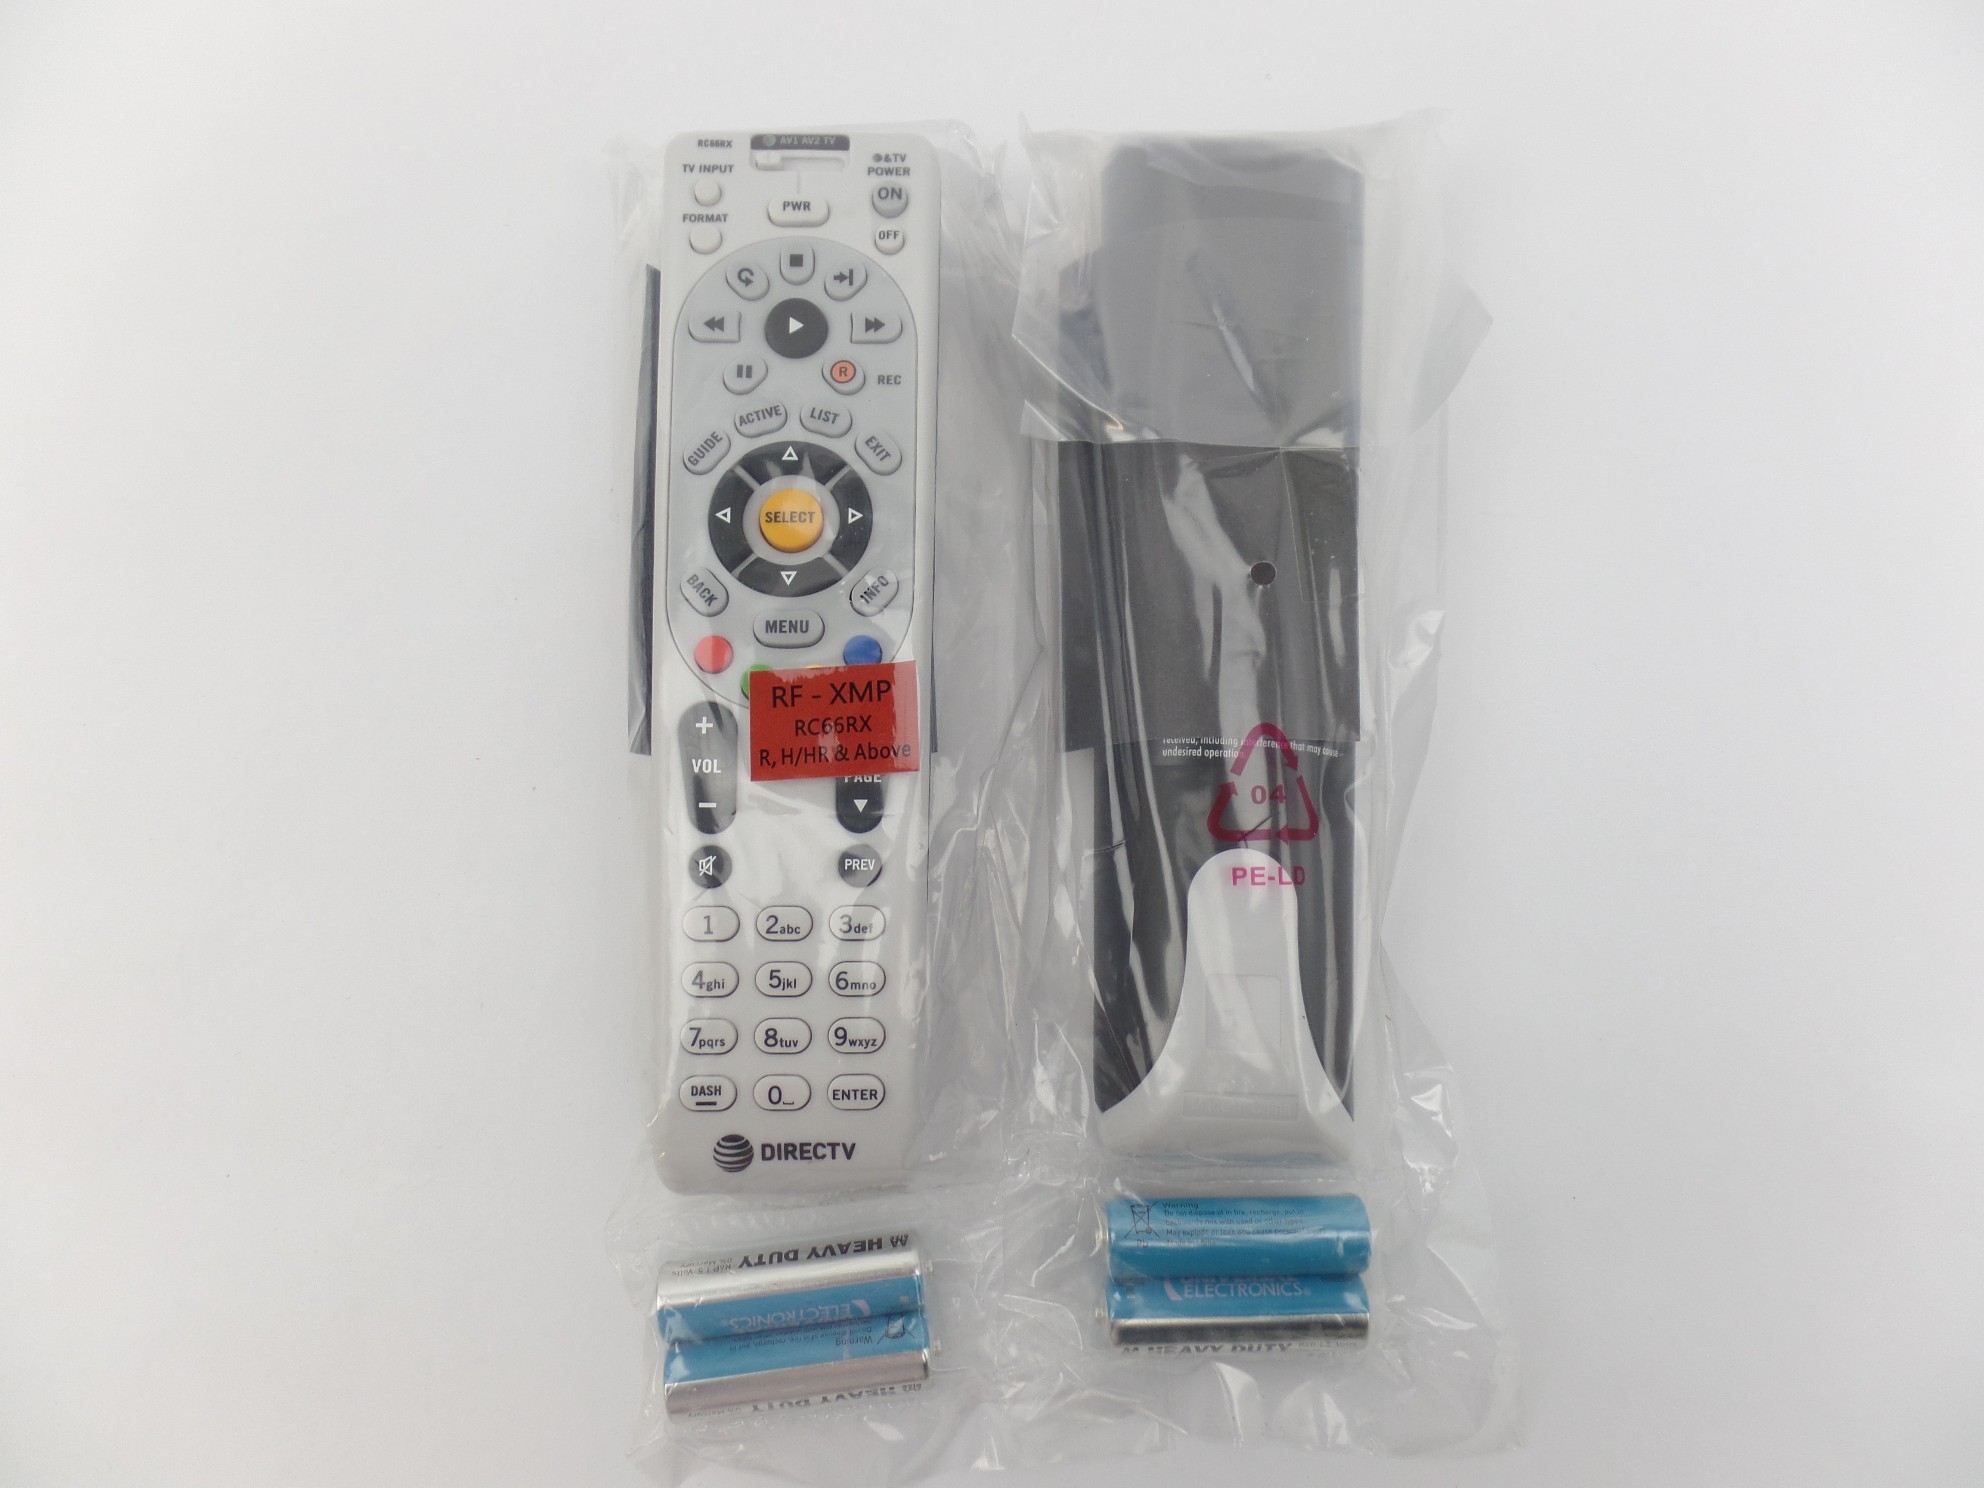 Lot of 2 RC66RX DirectTV Universal Remote Control Brand New